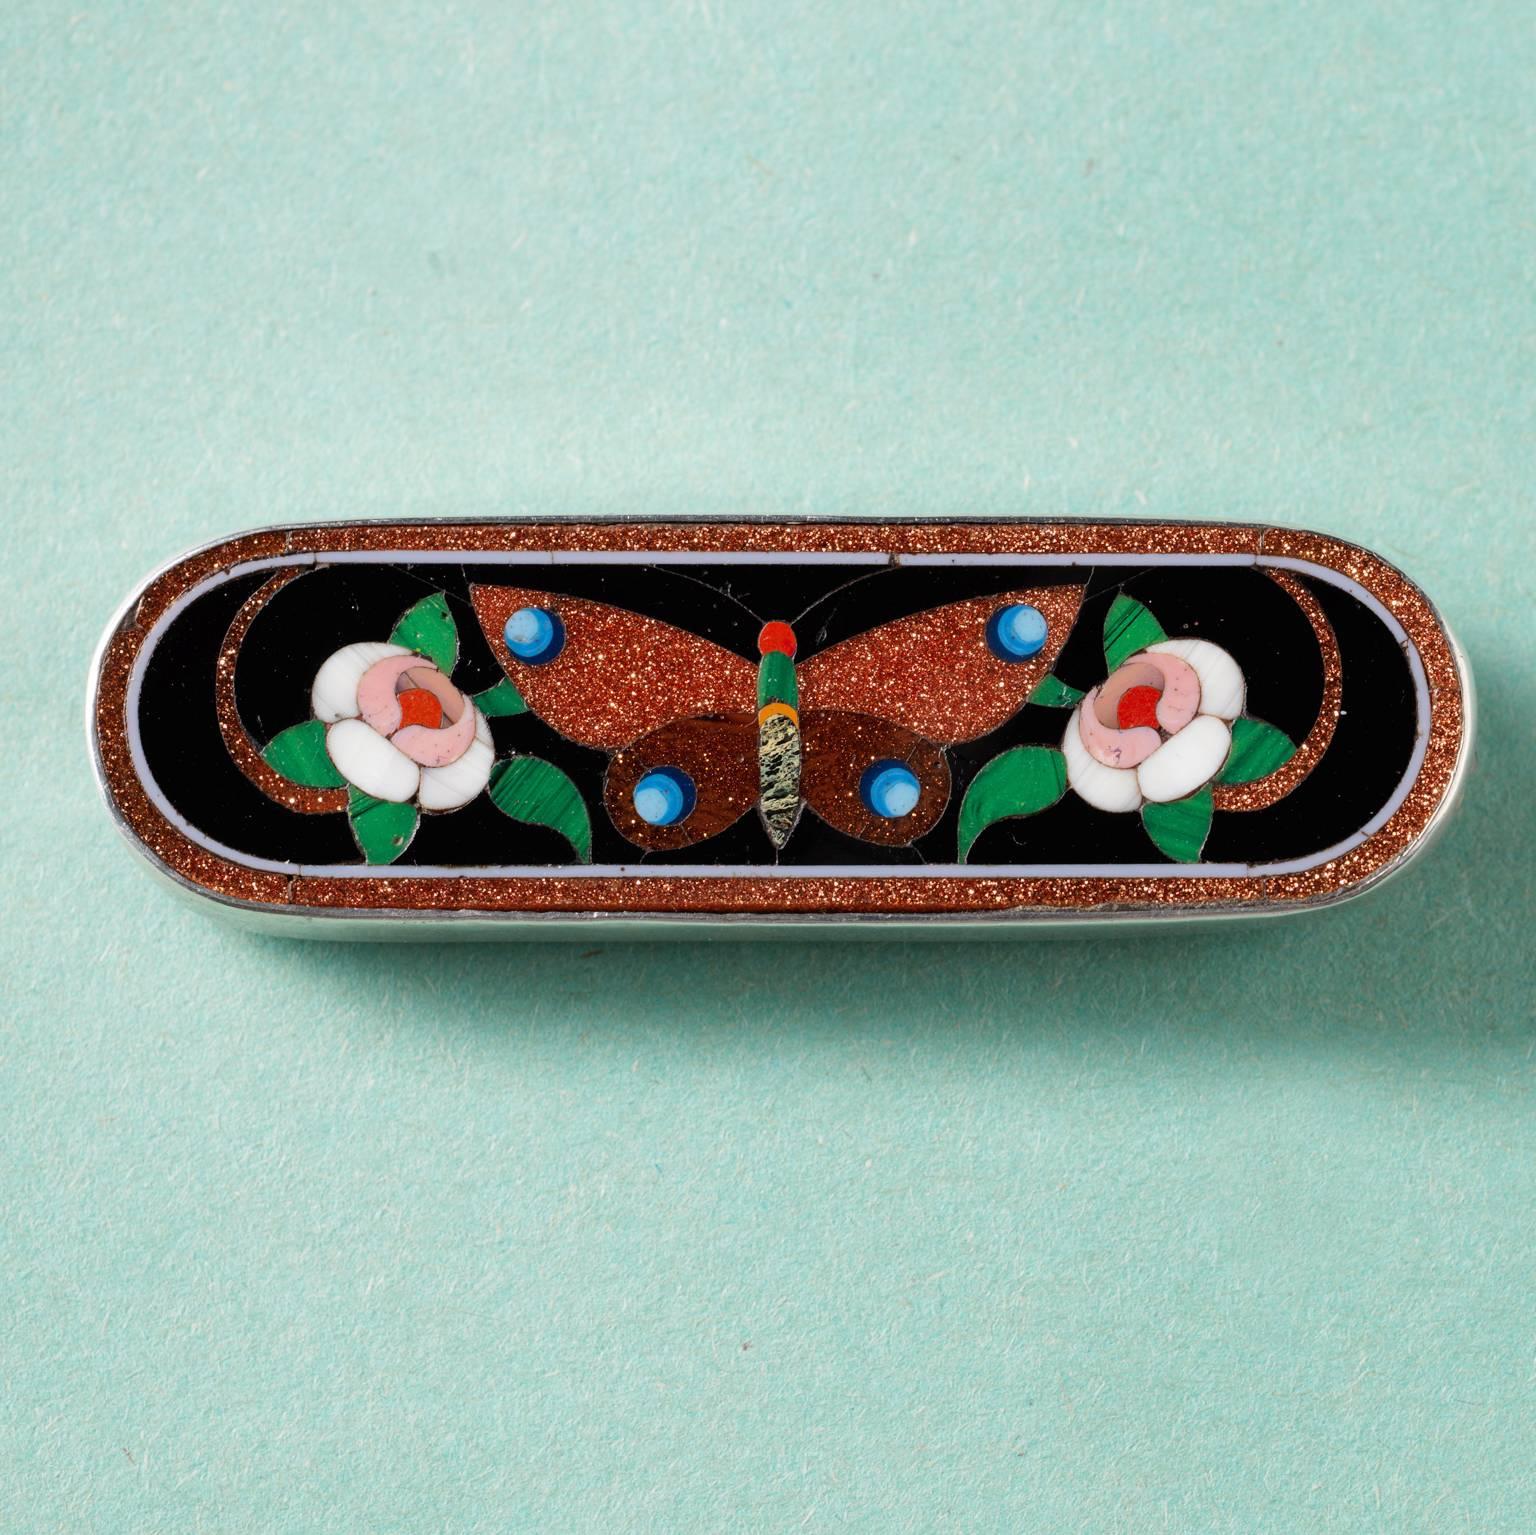 An oval silver brooch with a butterfly and flowers made of inlaid glass by Domenico Bussolin, 19th century, Italy.

weight: 14.43 grams
dimensions: 6.5 x 1.9 cm